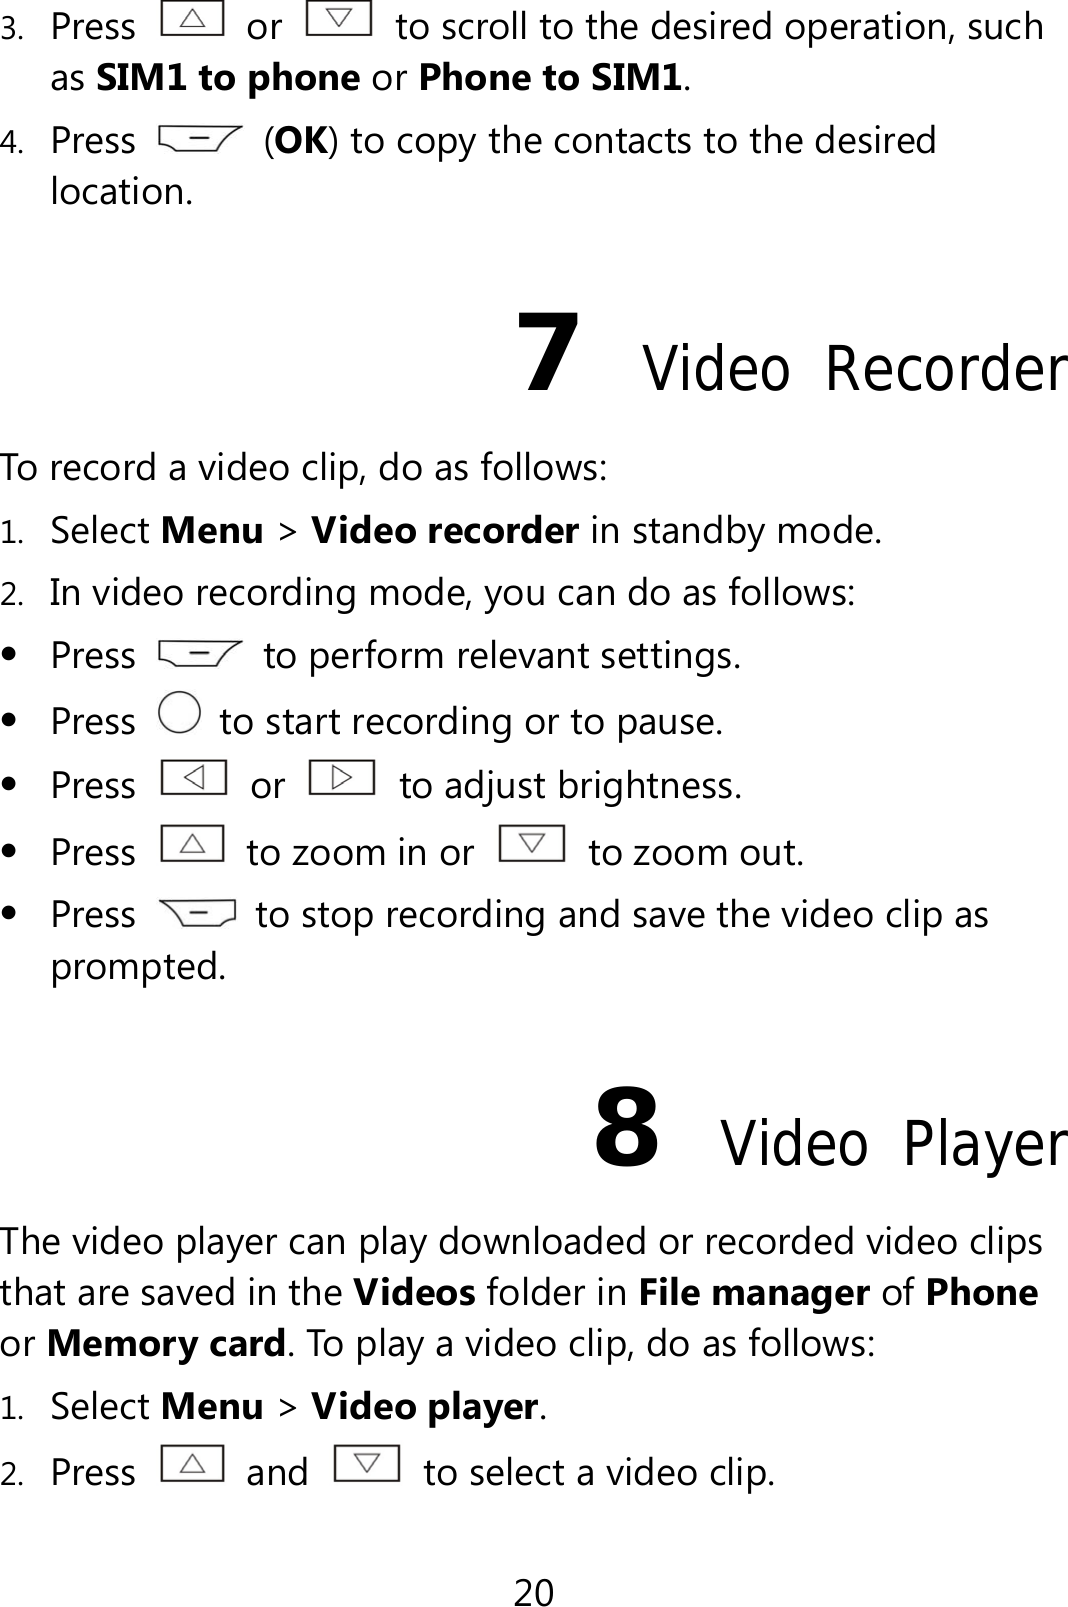 20 3. Press  or    to scroll to the desired operation, such as SIM1 to phone or Phone to SIM1. 4. Press   (OK) to copy the contacts to the desired location. 7  Video Recorder To record a video clip, do as follows: 1. Select Menu &gt; Video recorder in standby mode. 2. In video recording mode, you can do as follows:  Press    to perform relevant settings.  Press    to start recording or to pause.  Press   or   to adjust brightness.  Press    to zoom in or    to zoom out.  Press    to stop recording and save the video clip as prompted. 8  Video Player The video player can play downloaded or recorded video clips that are saved in the Videos folder in File manager of Phone or Memory card. To play a video clip, do as follows: 1. Select Menu &gt; Video player. 2. Press   and    to select a video clip. 